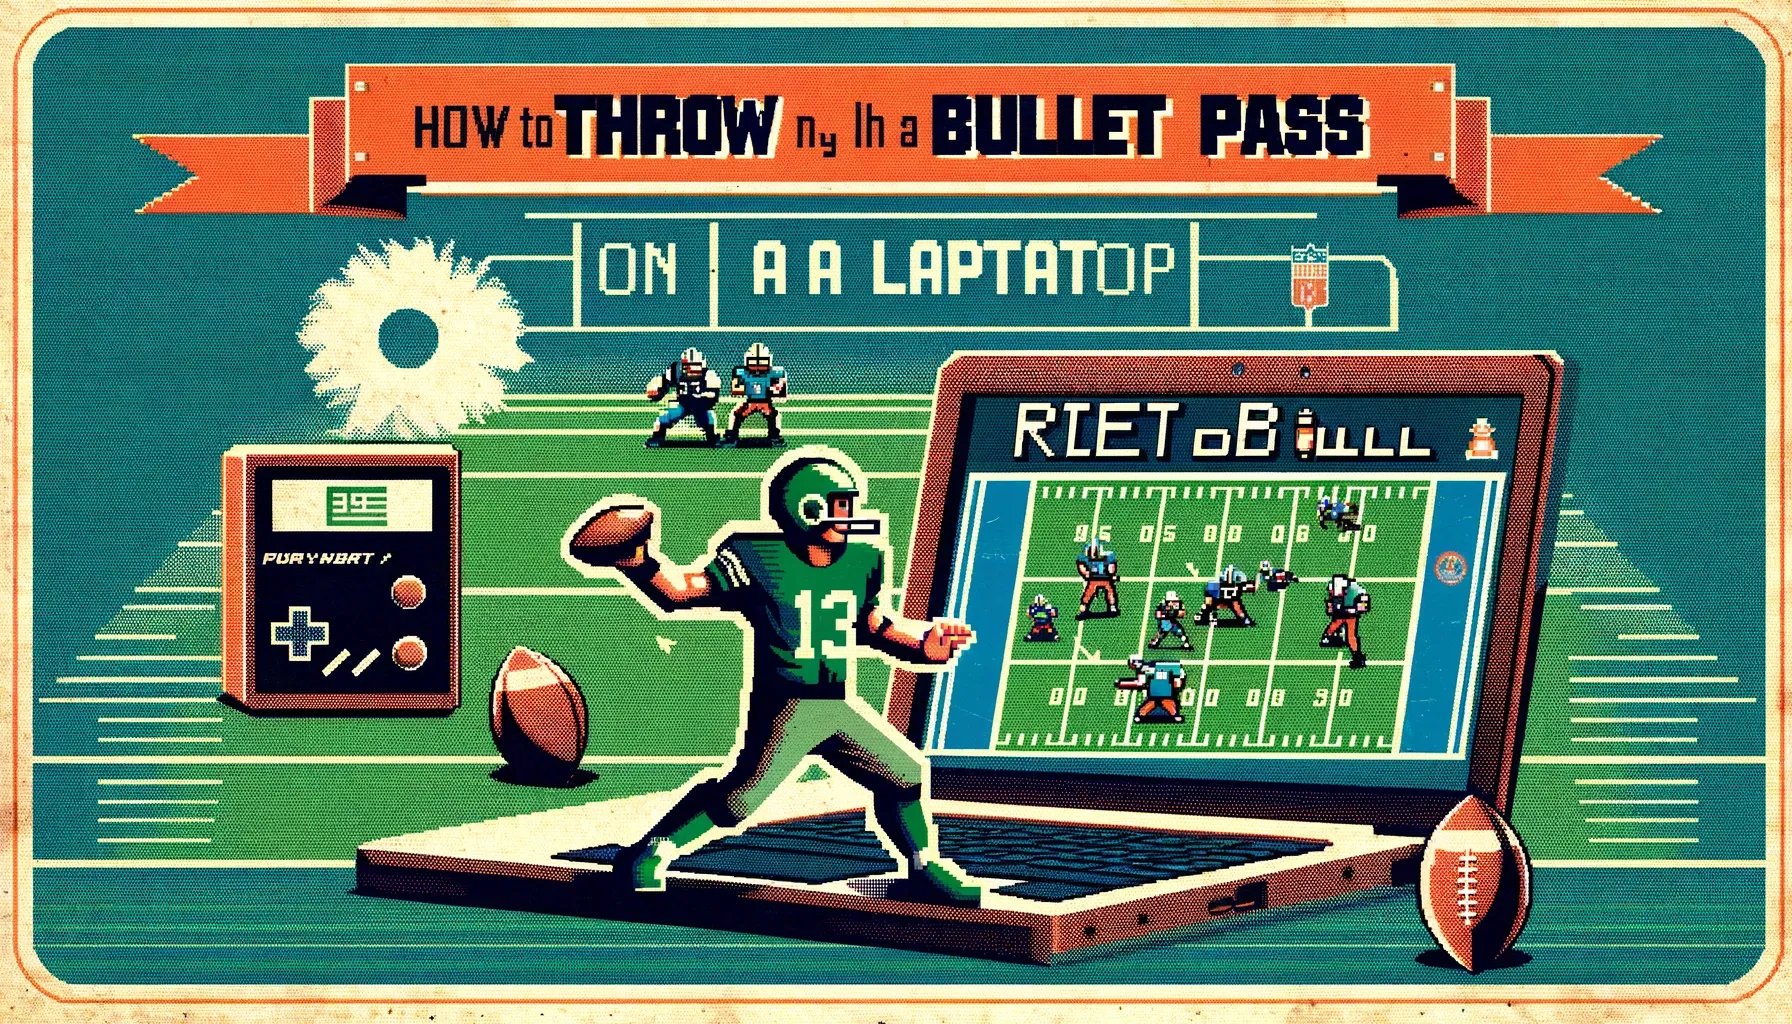 How to Throw a Bullet Pass in Retro Bowl on a Laptop?